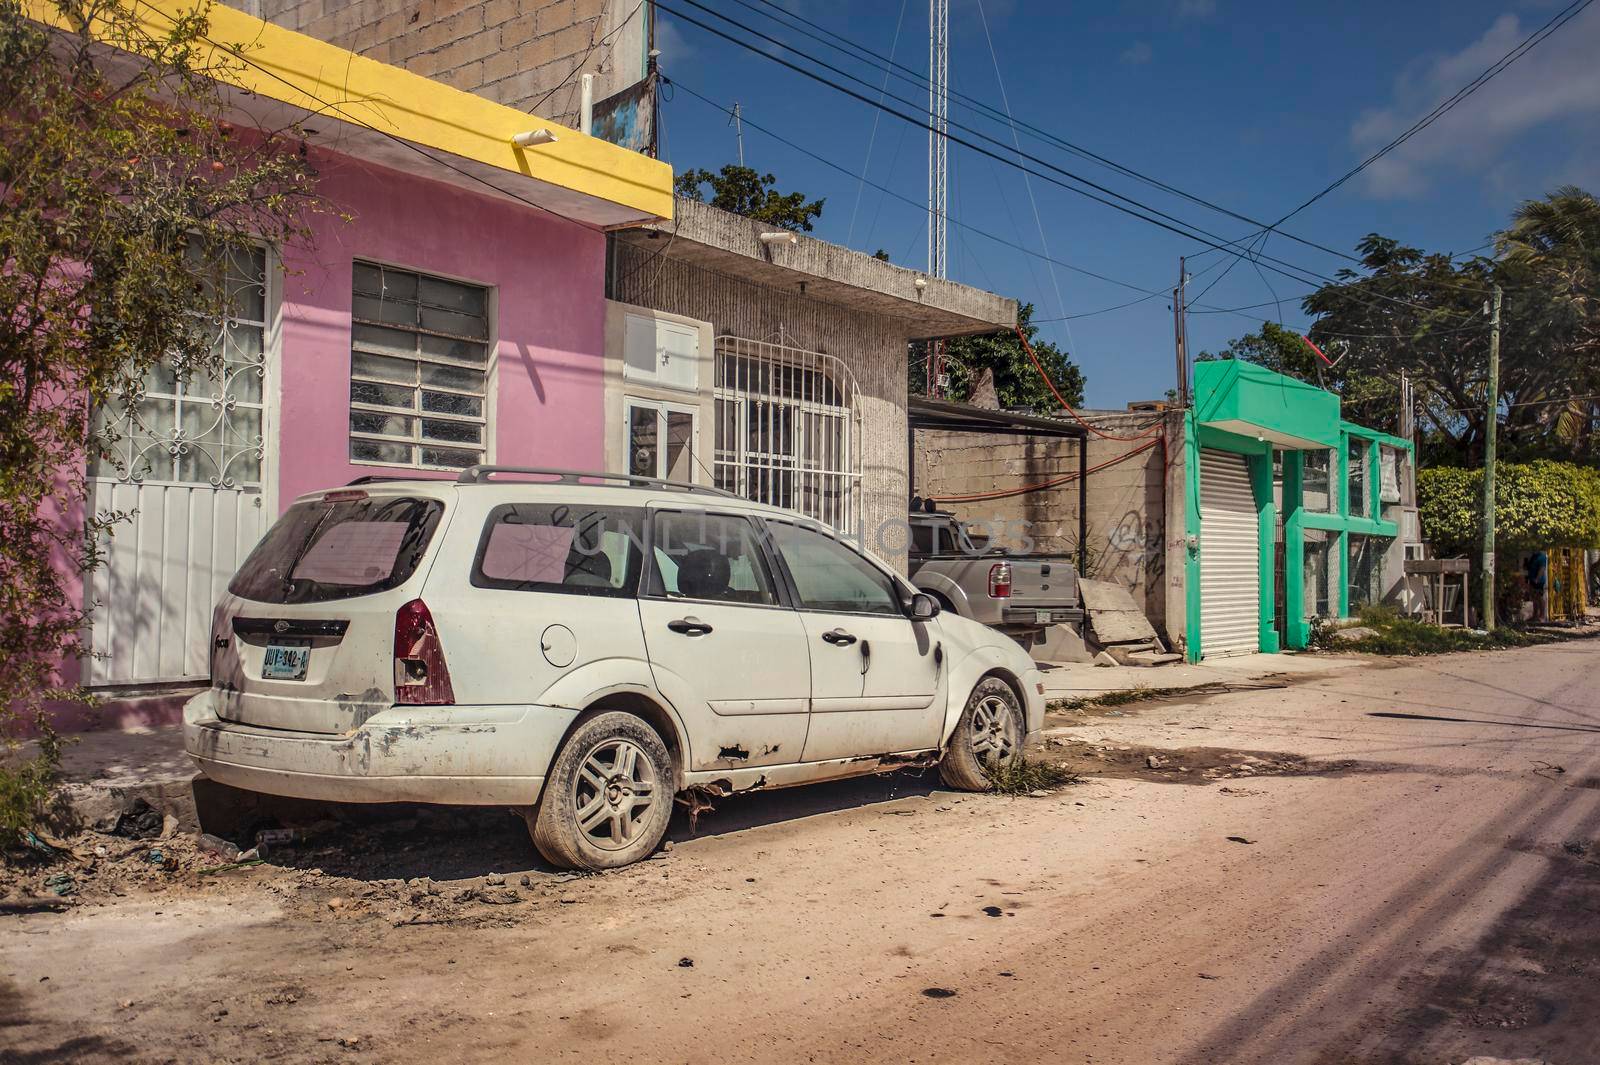 Tulum, Mexico 20 august 2022: View of a car destroyed and corroded by wear and tear on the side of a street in a poorer neighborhood of Tulum, Mexico